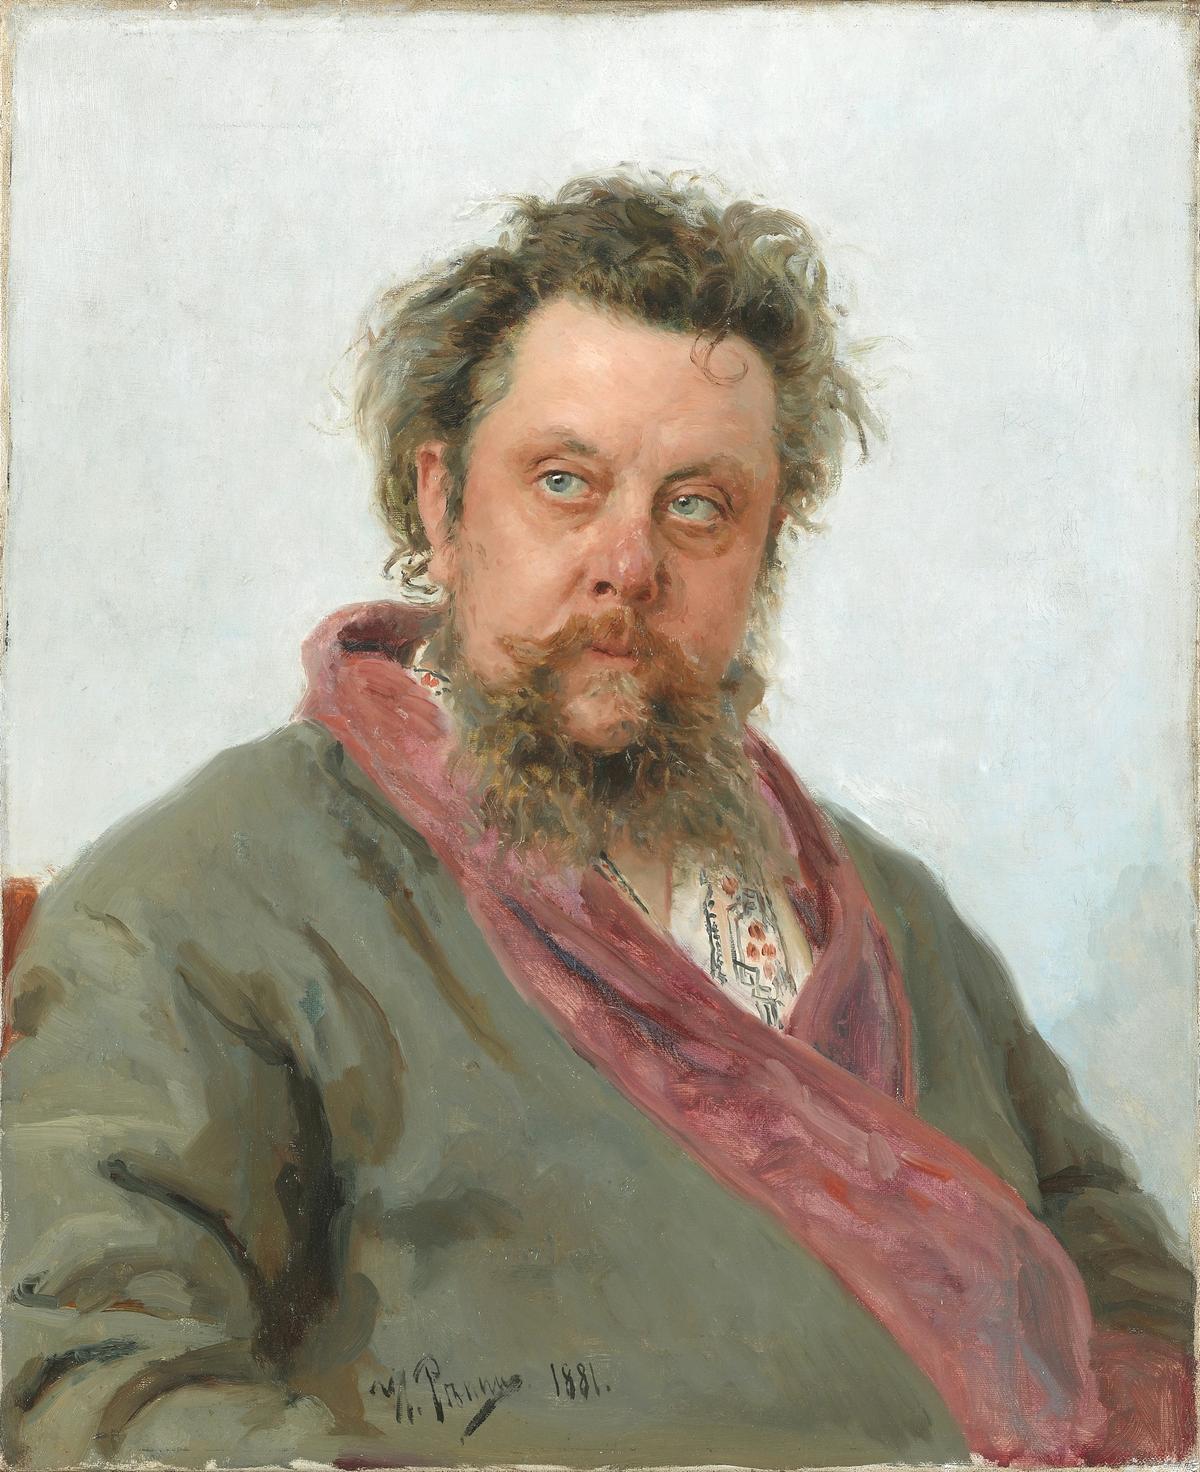 Portrait of the composer Modest Petrovich Mussorgsky, circa 1881, by Ilya Repin. Oil on canvas; 28.2 inches by 23 inches. Tretyakov Gallery in Moscow. (Public Domain)